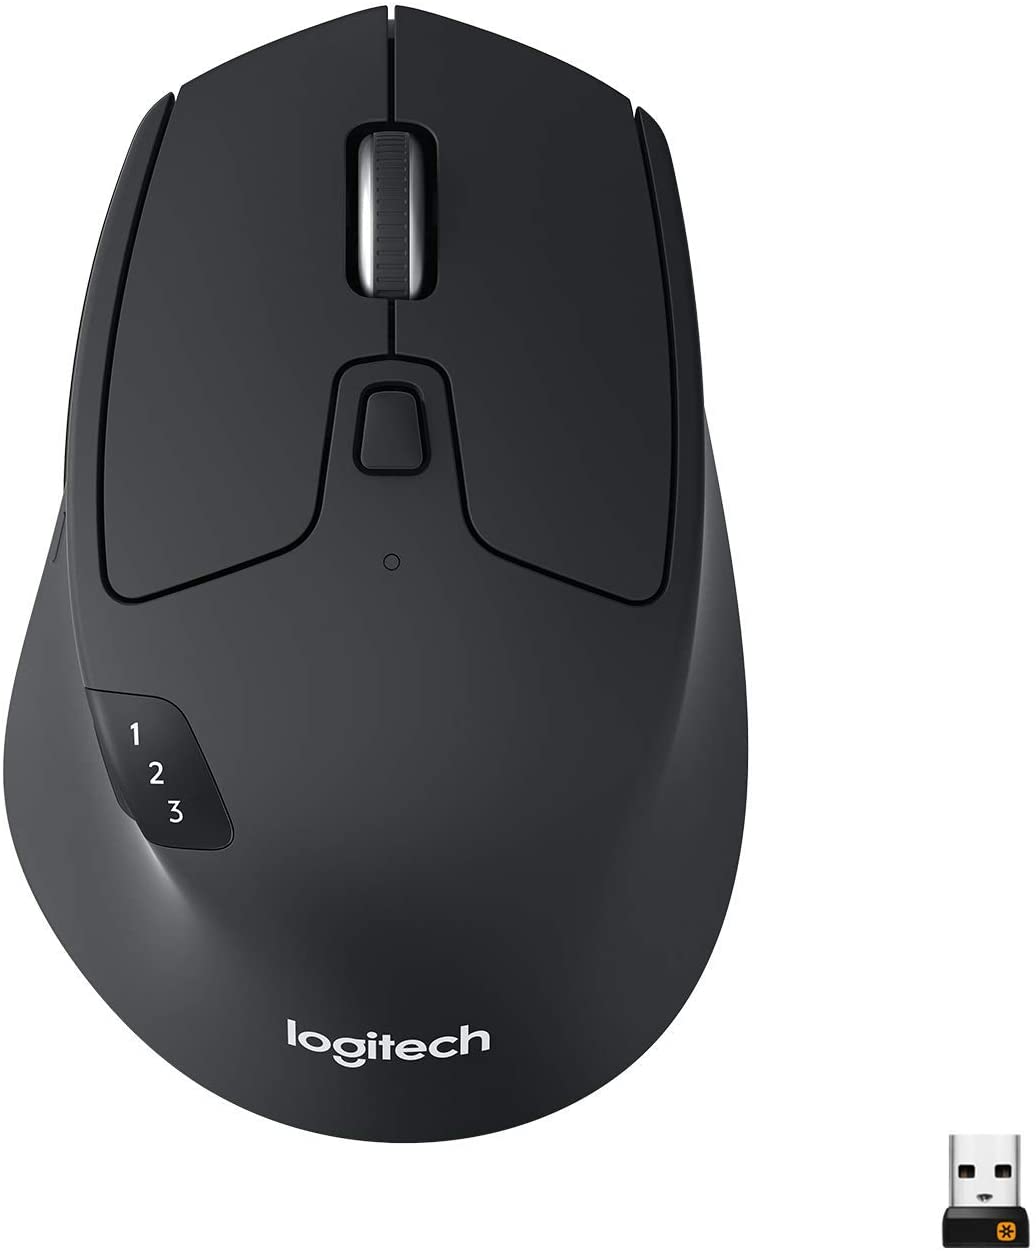 Logitech wireless mouse for the home office